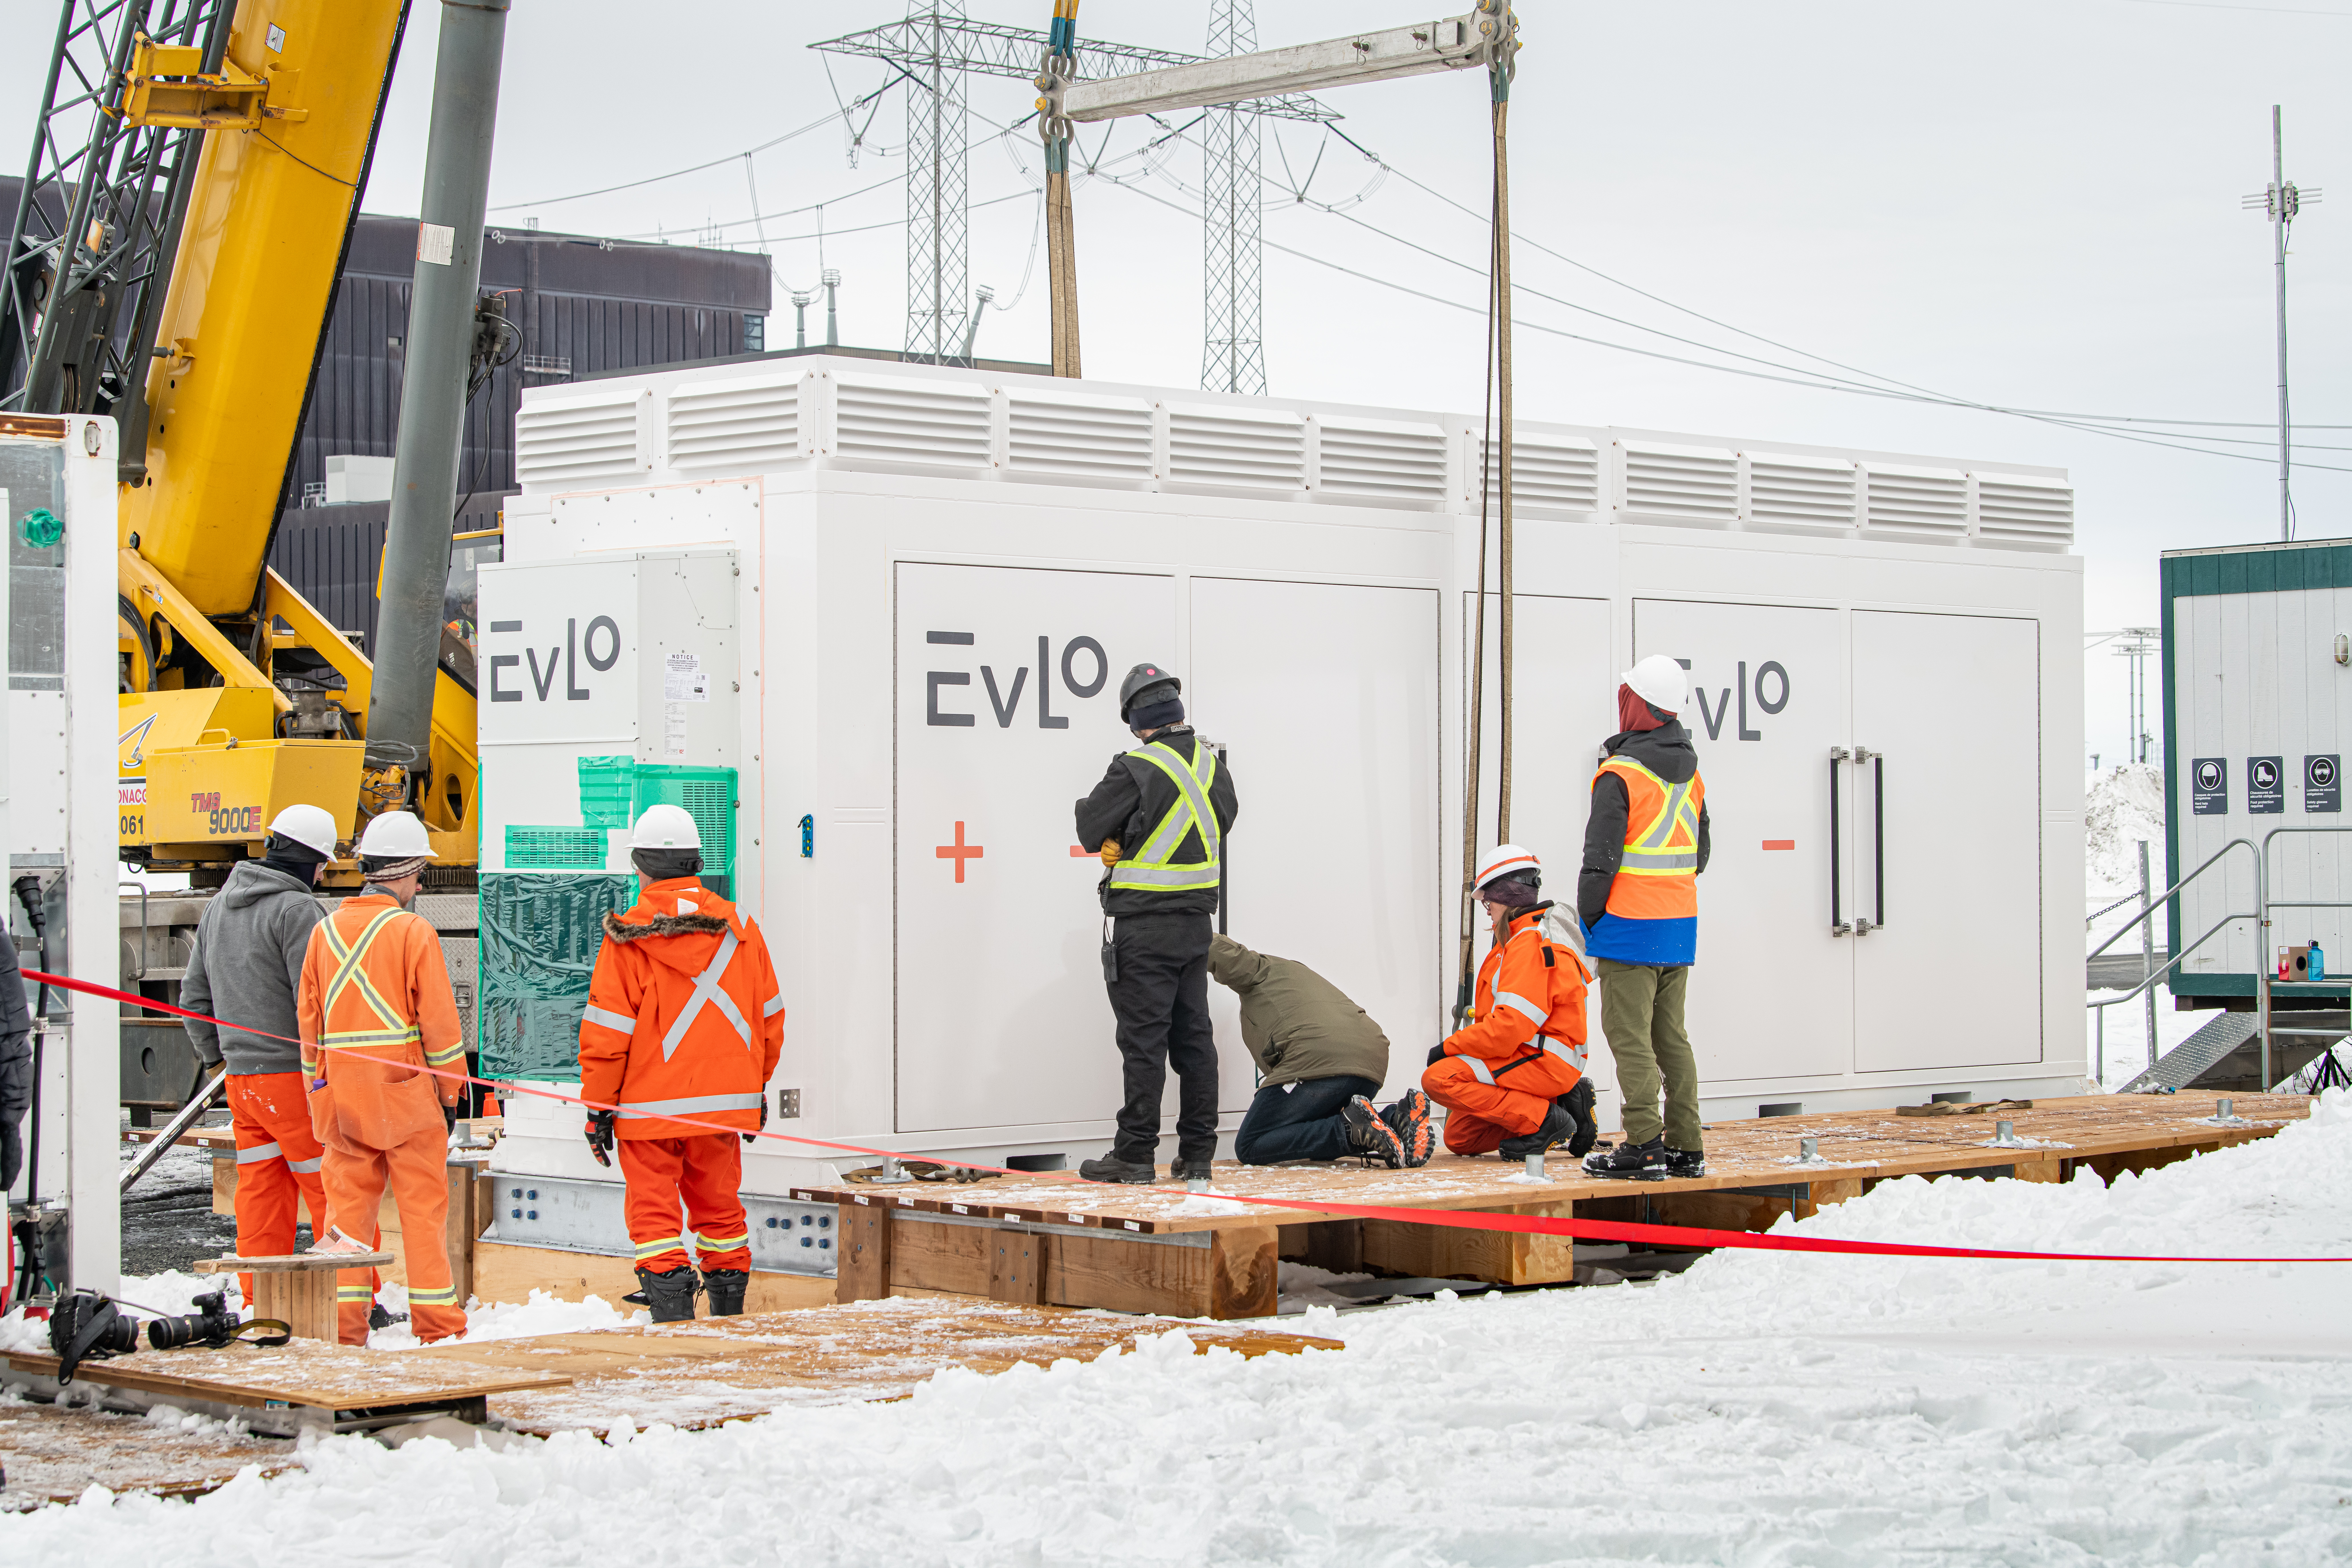 Workers installing an EVLO unit